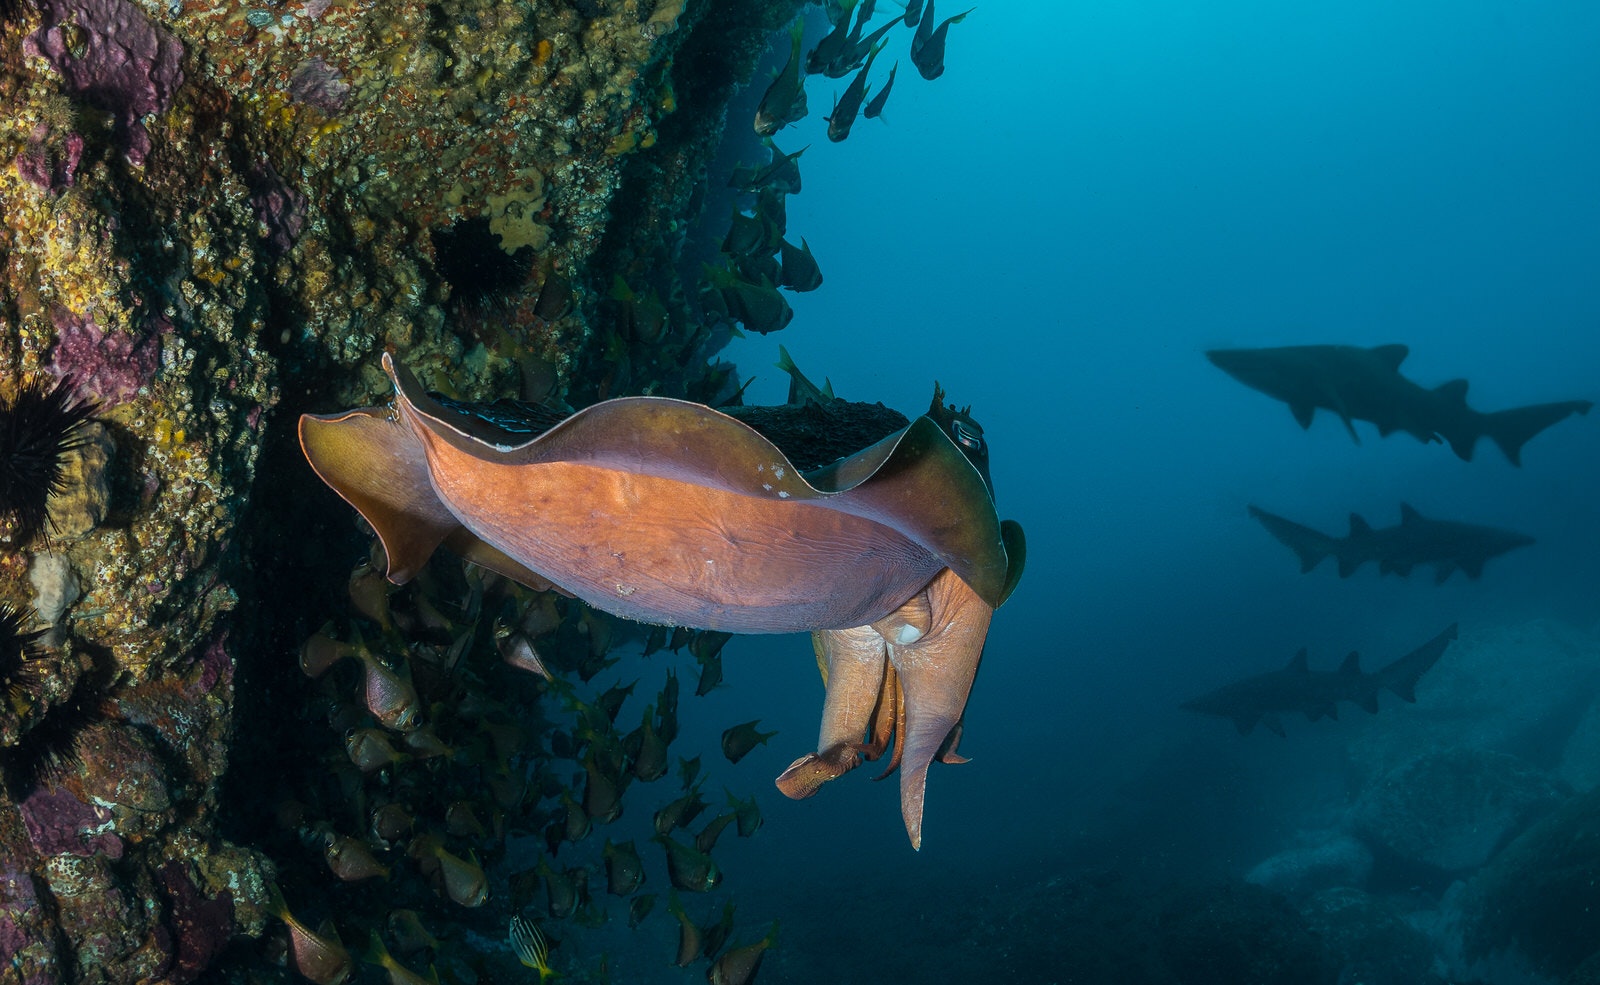 Giant Cuttlefish with shark silhouettes in the background off Eyre Peninsula, one of Australia's best diving spots